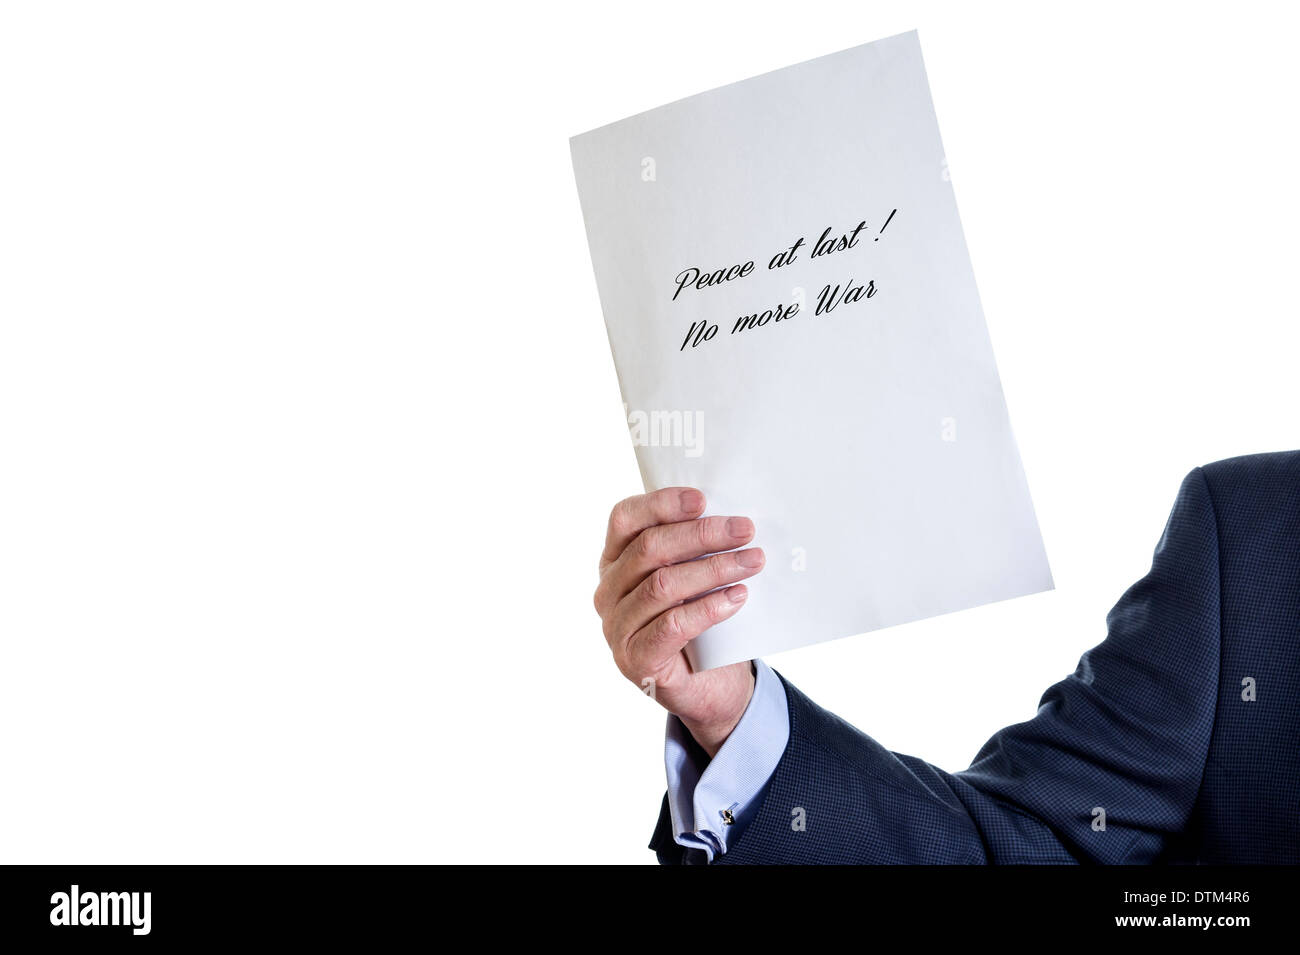 Man holding a sheet of white paper. 'Peace at last! No more war' quote. Stock Photo